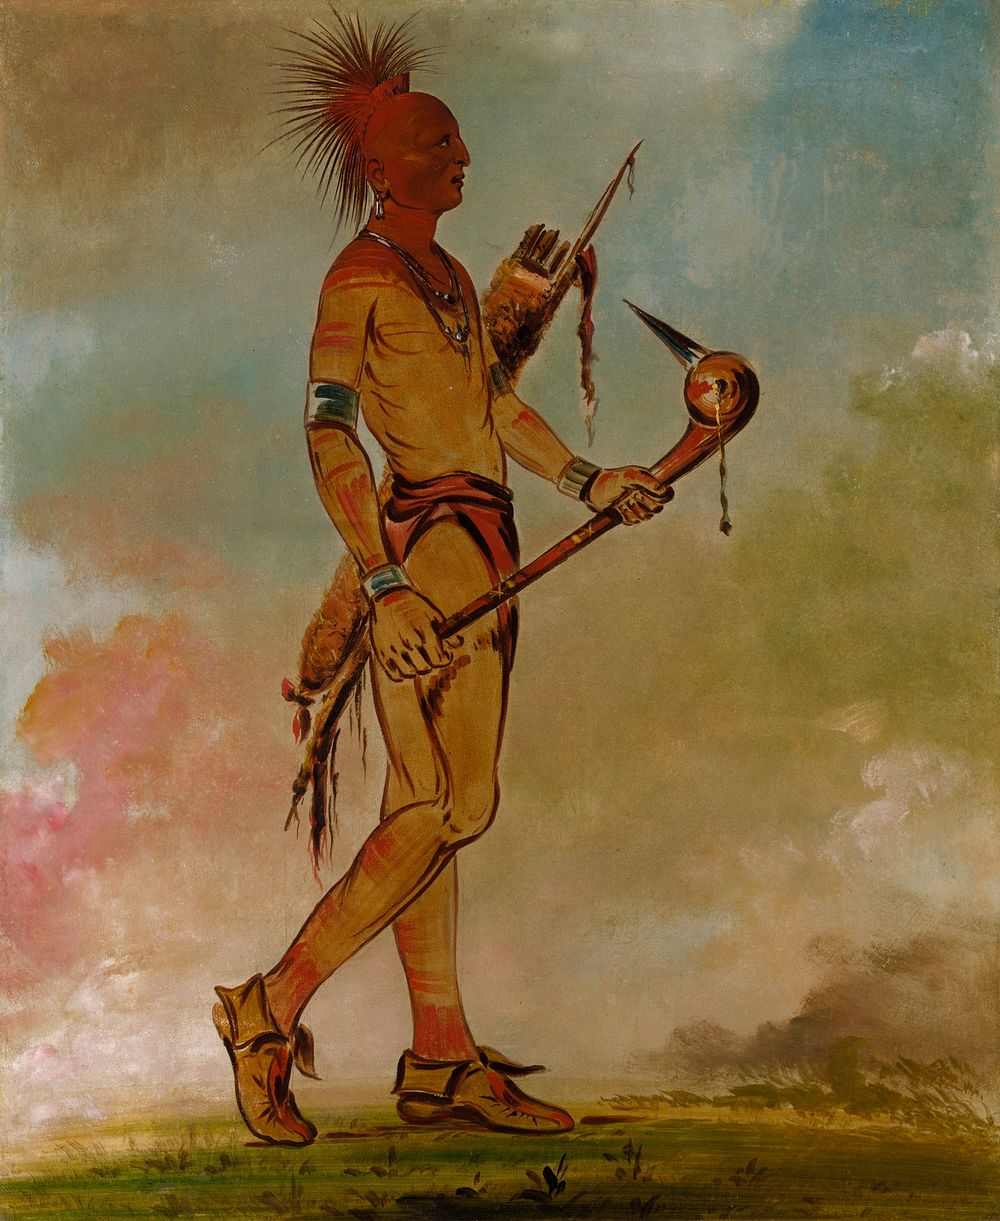 Shin-ga-w&aacute;s-sa, Handsome Bird (1834) painting in high resolution by George Catlin.  